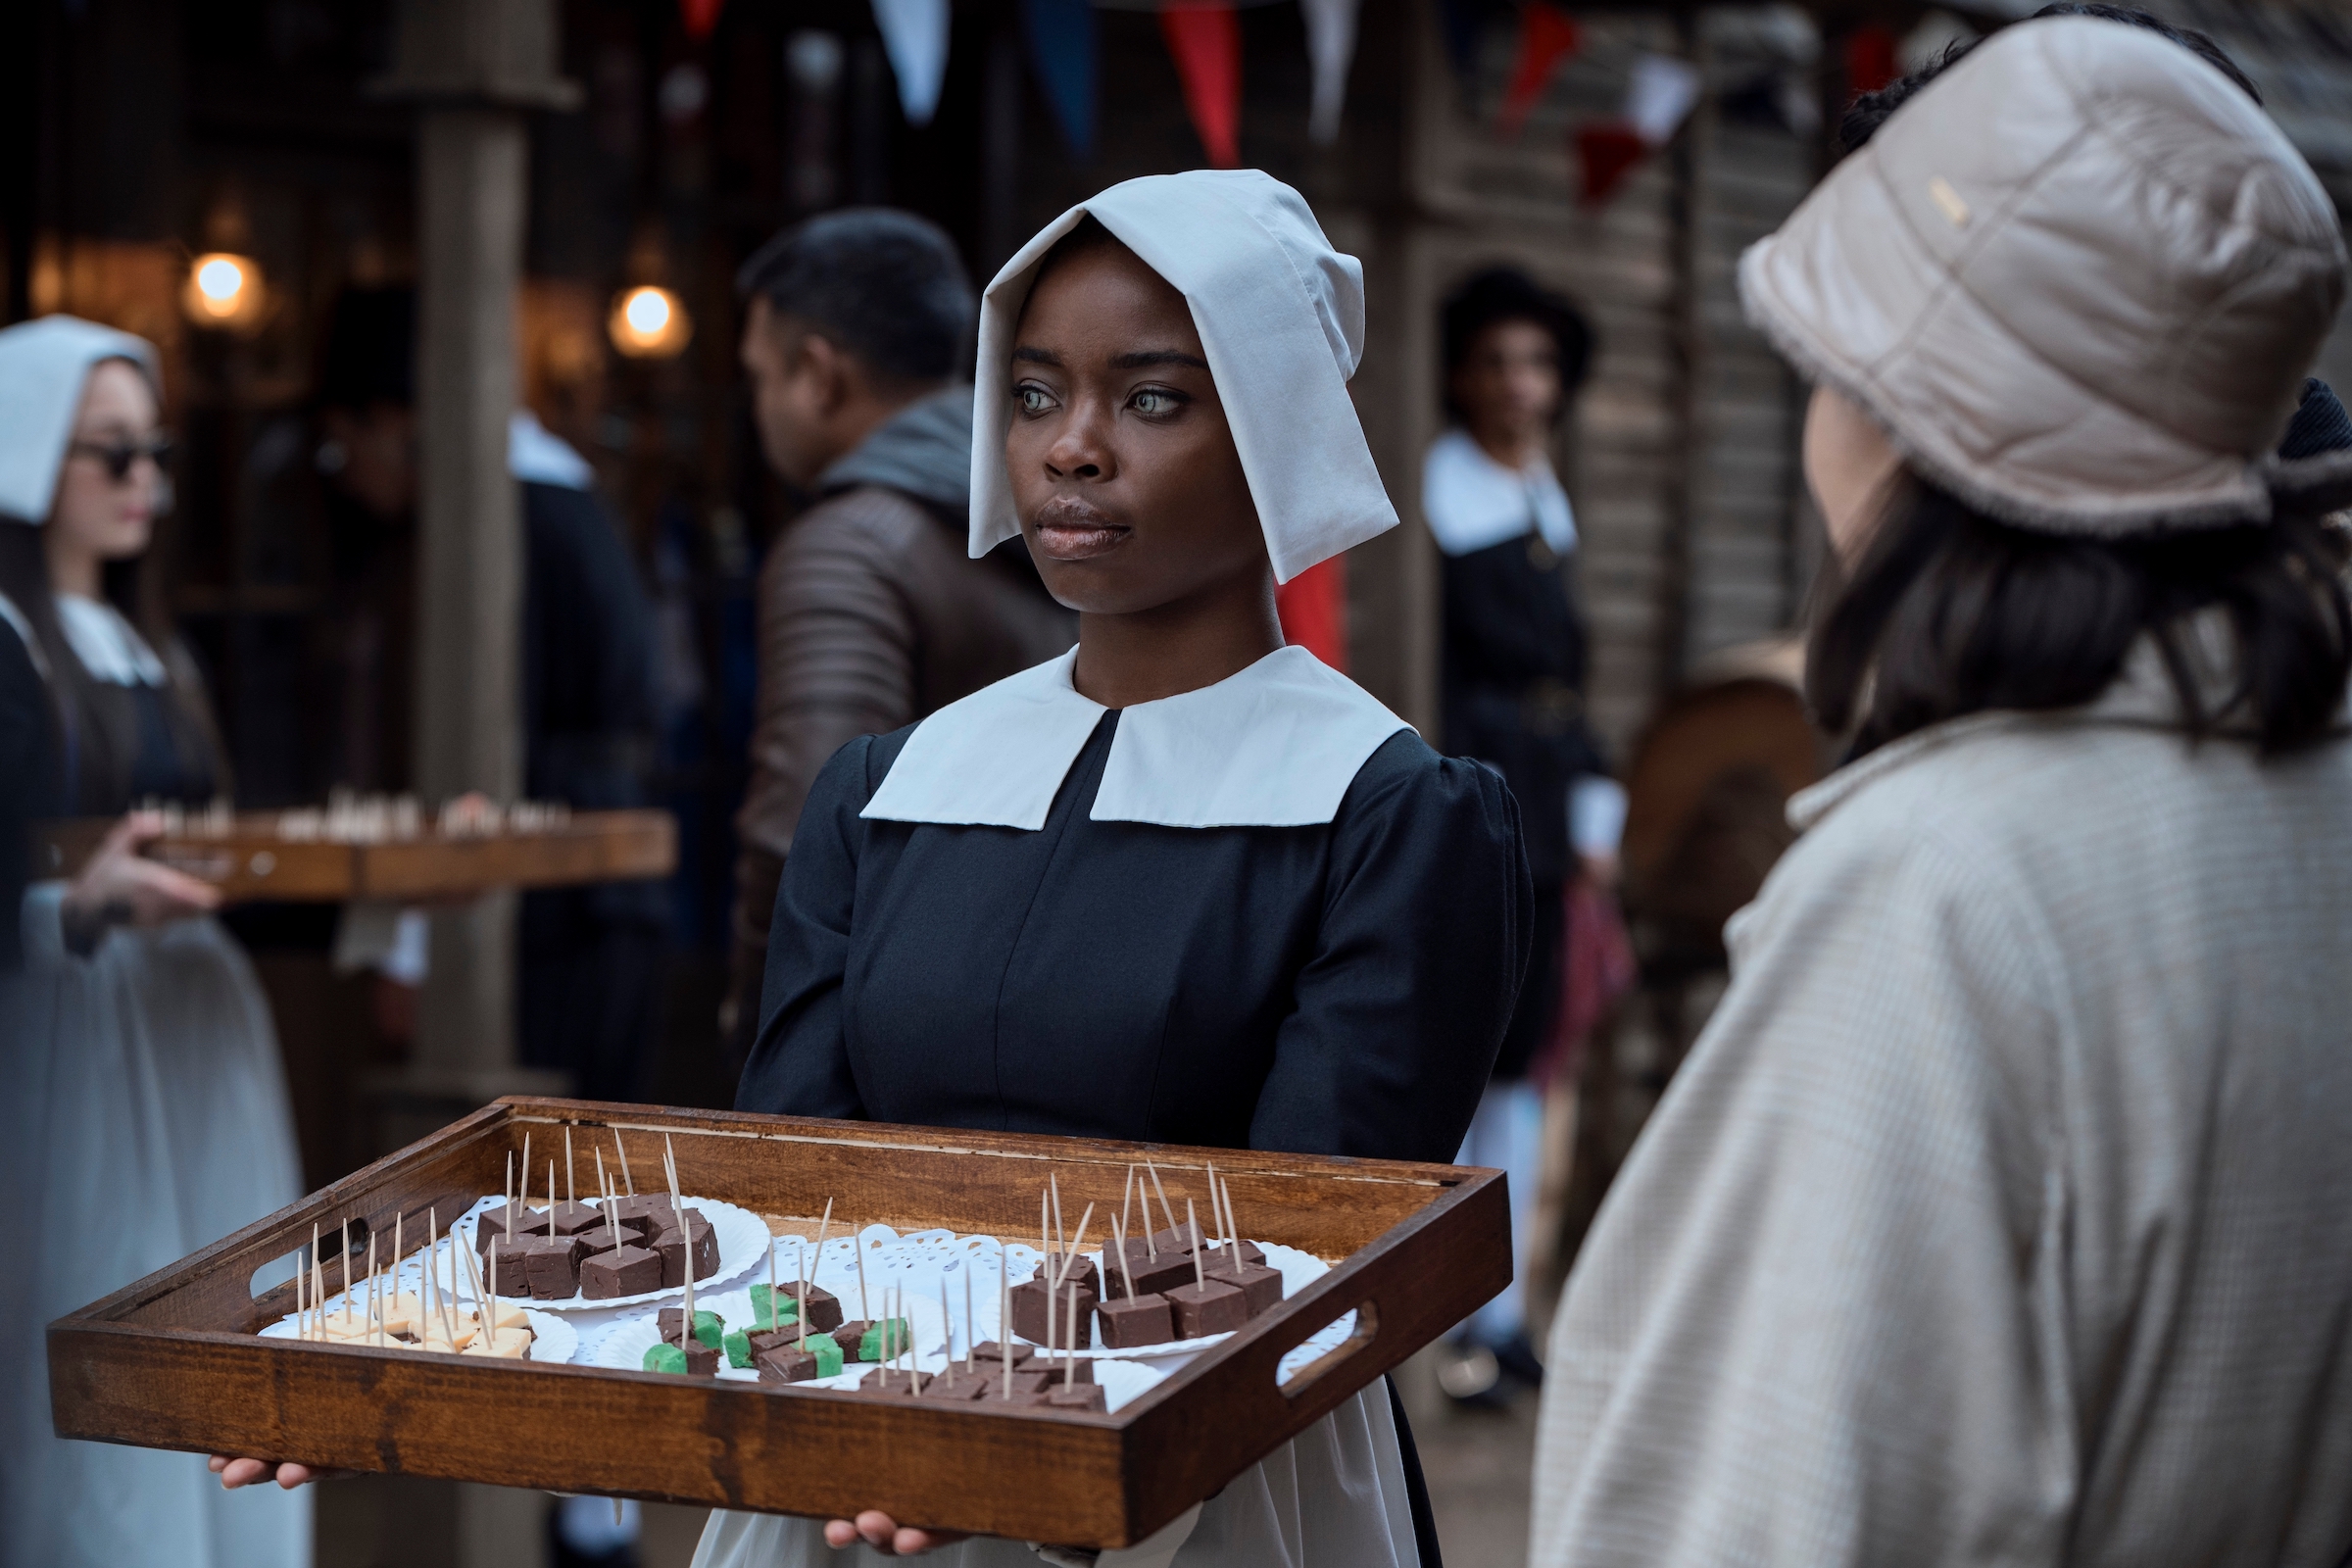 Bianca Barclay (Joy Sunday), a mermaid student at Nevermore, offers free fudge samples at Pilgrim World as part of Outreach Day.  (Vlad Choplea—Netflix)